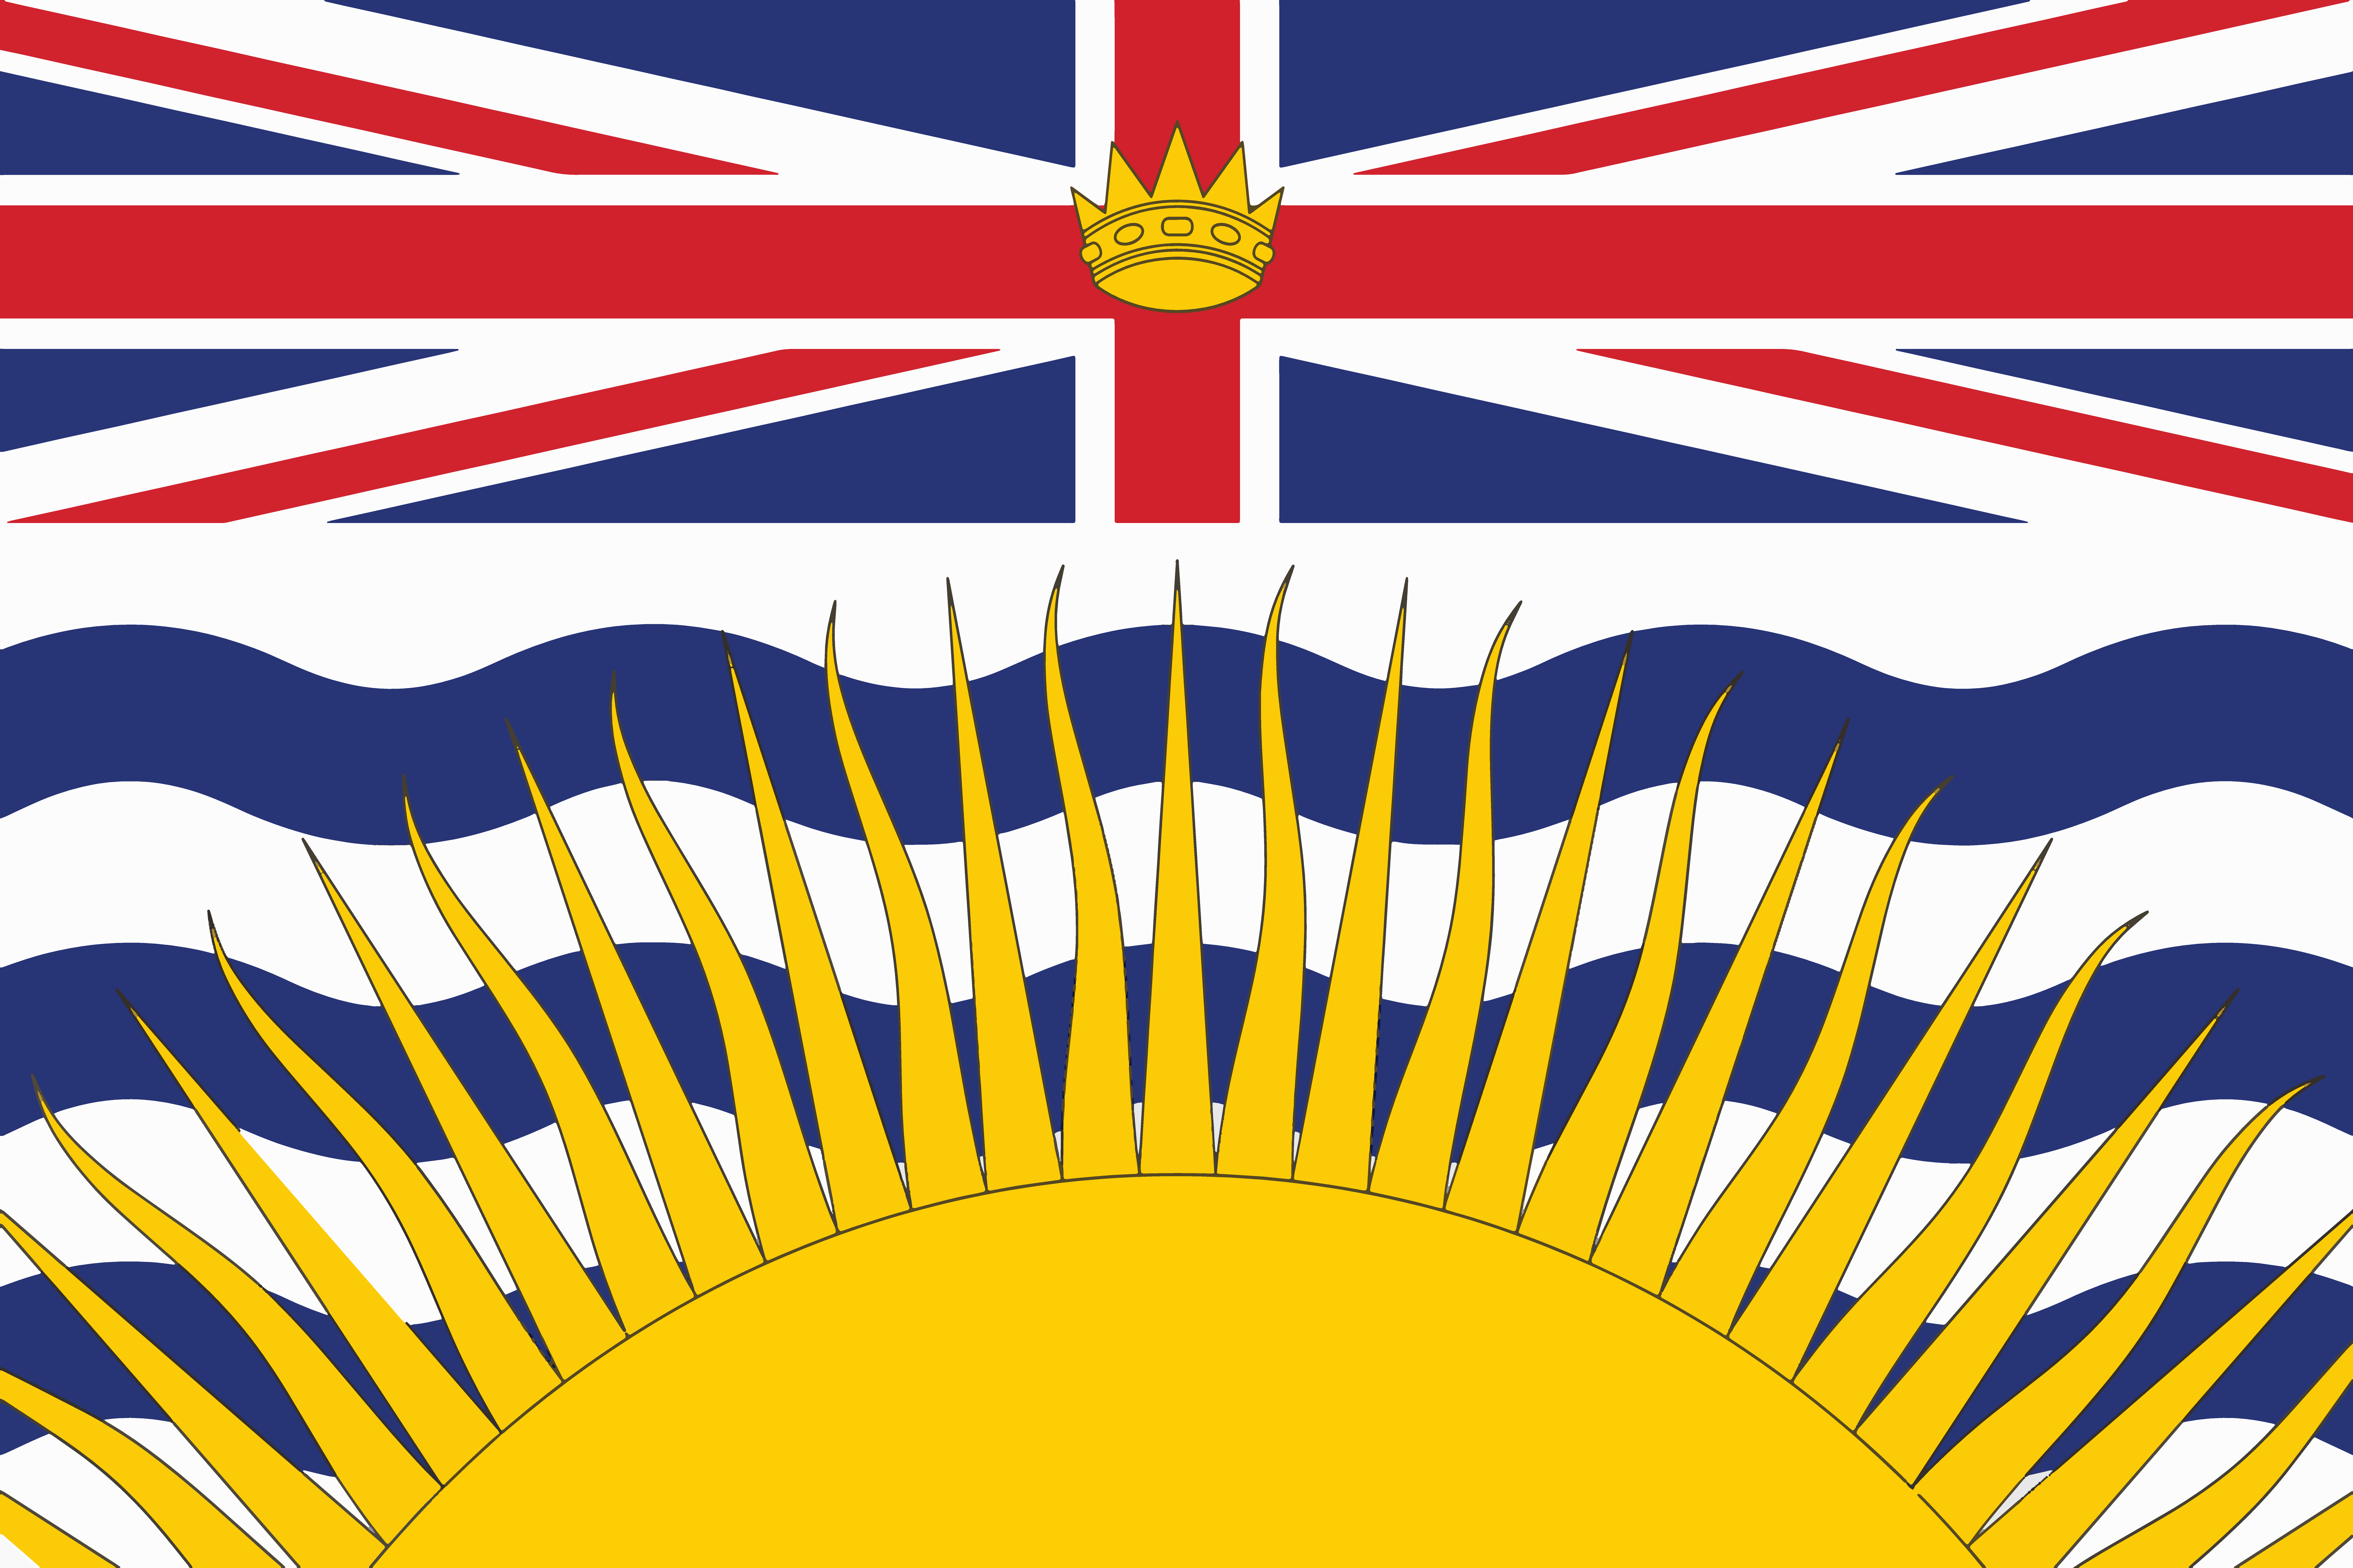 Fifteen Fun Facts About Our Amazing Province to Celebrate B.C. Day!